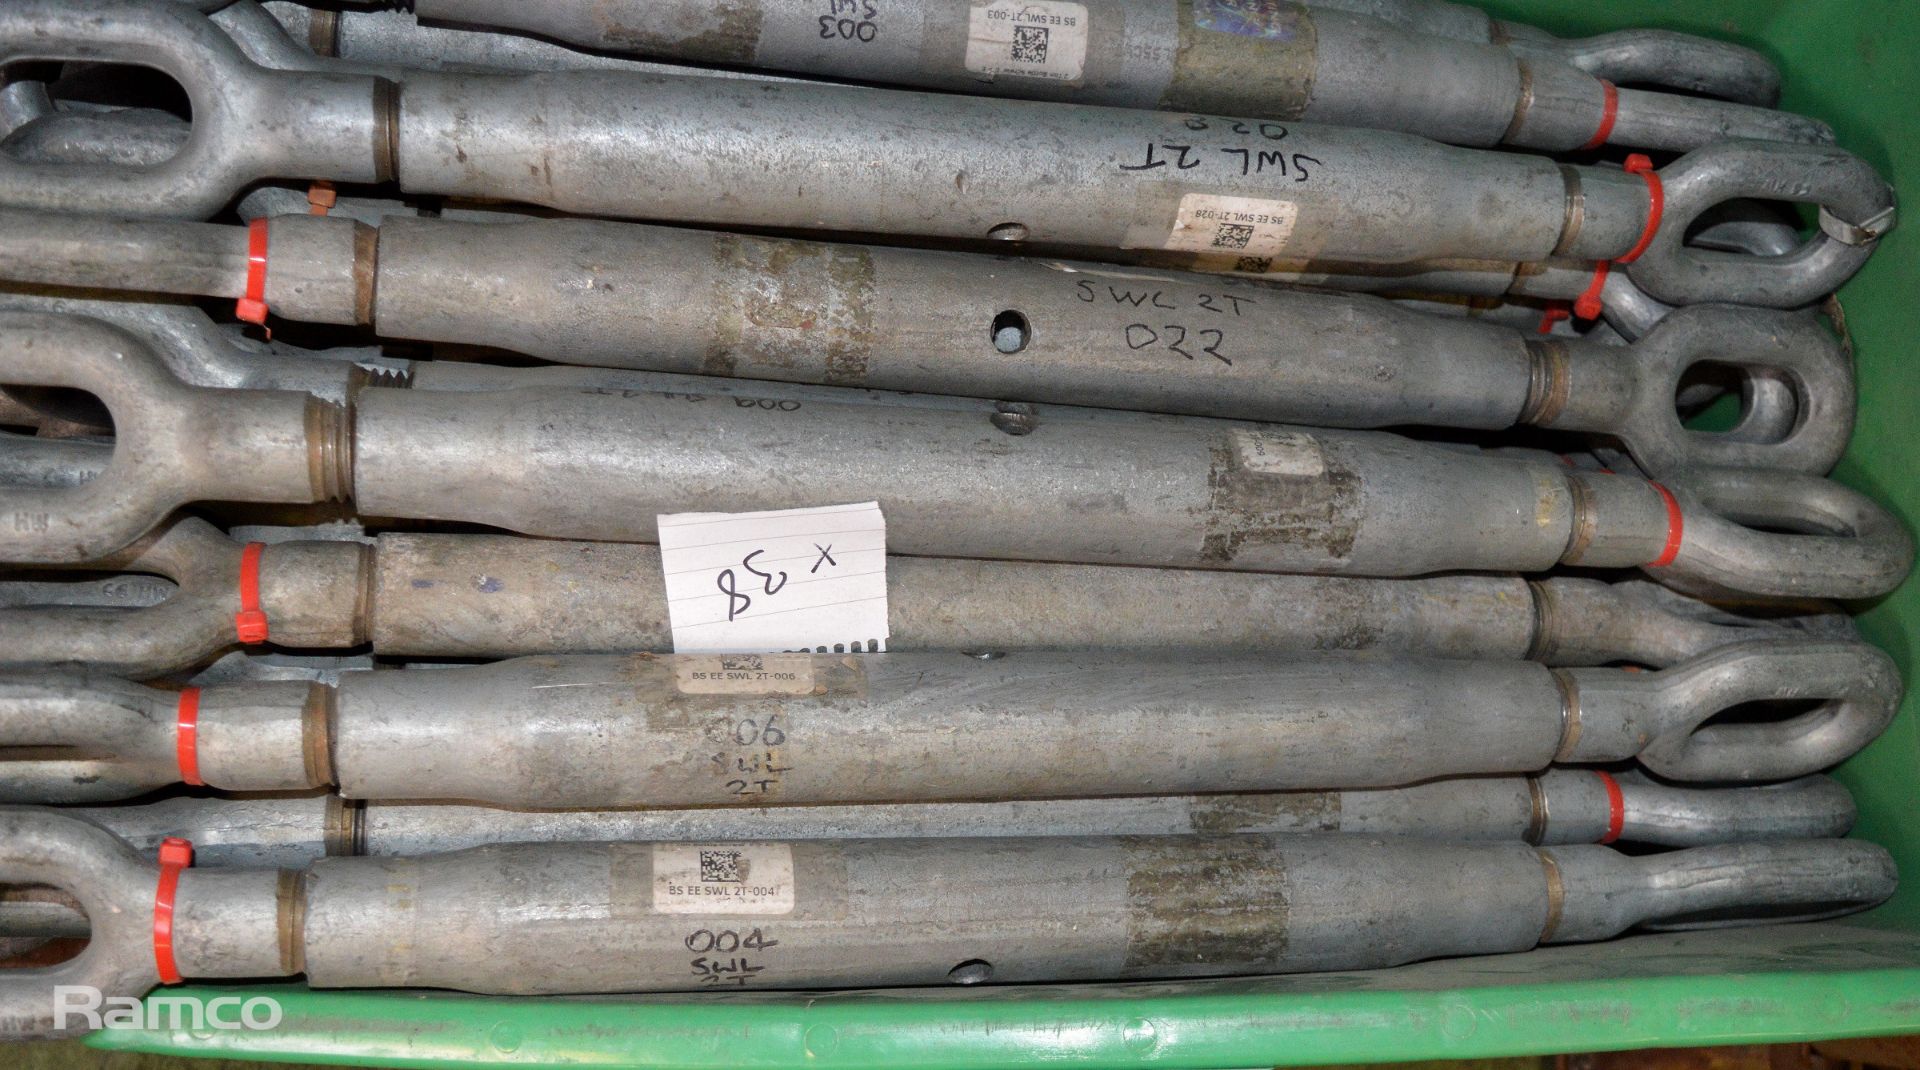 38x Heavy duty tensioning bars - 2T - Image 2 of 3